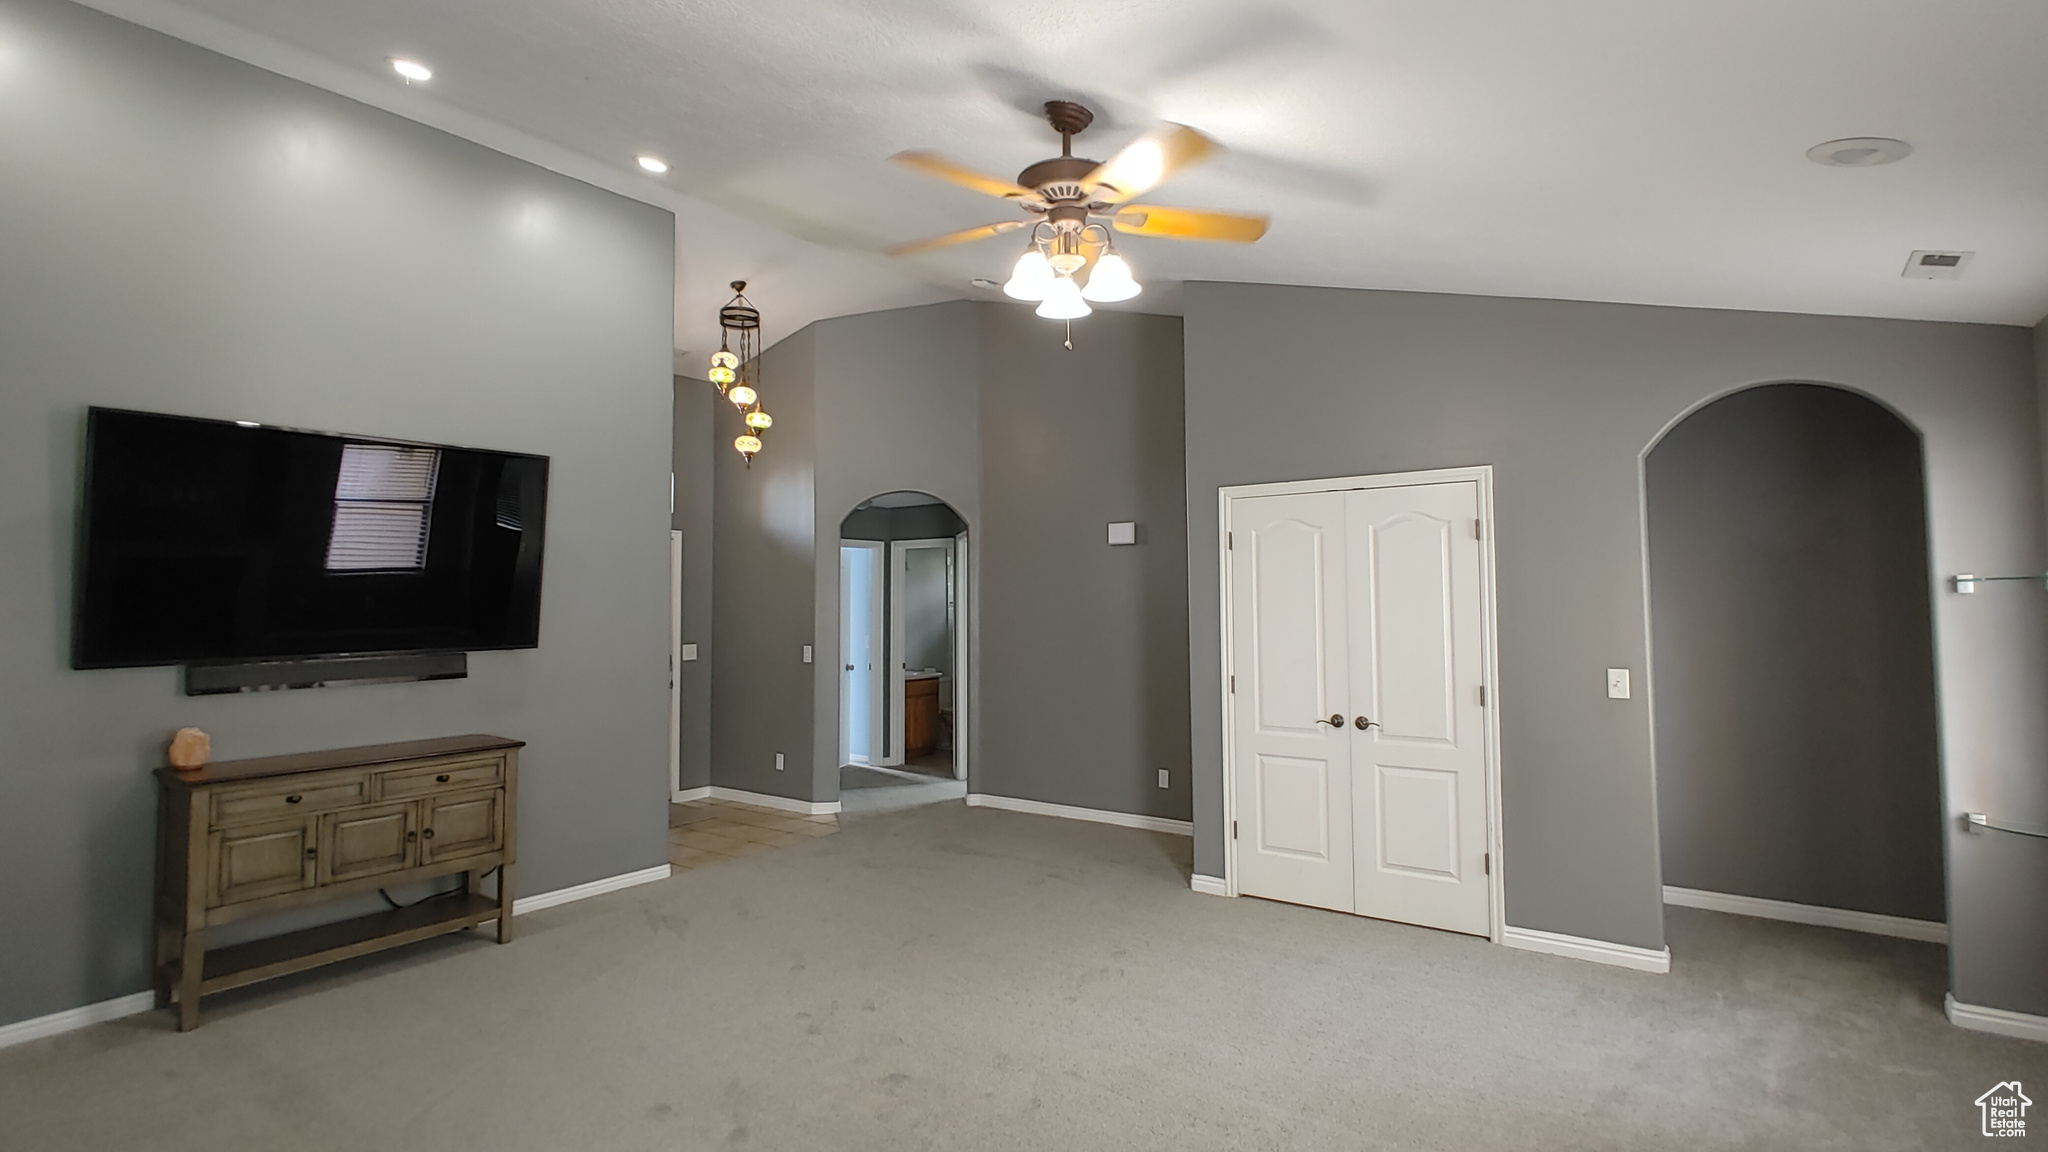 Unfurnished living room with high vaulted ceiling, ceiling fan, and carpet